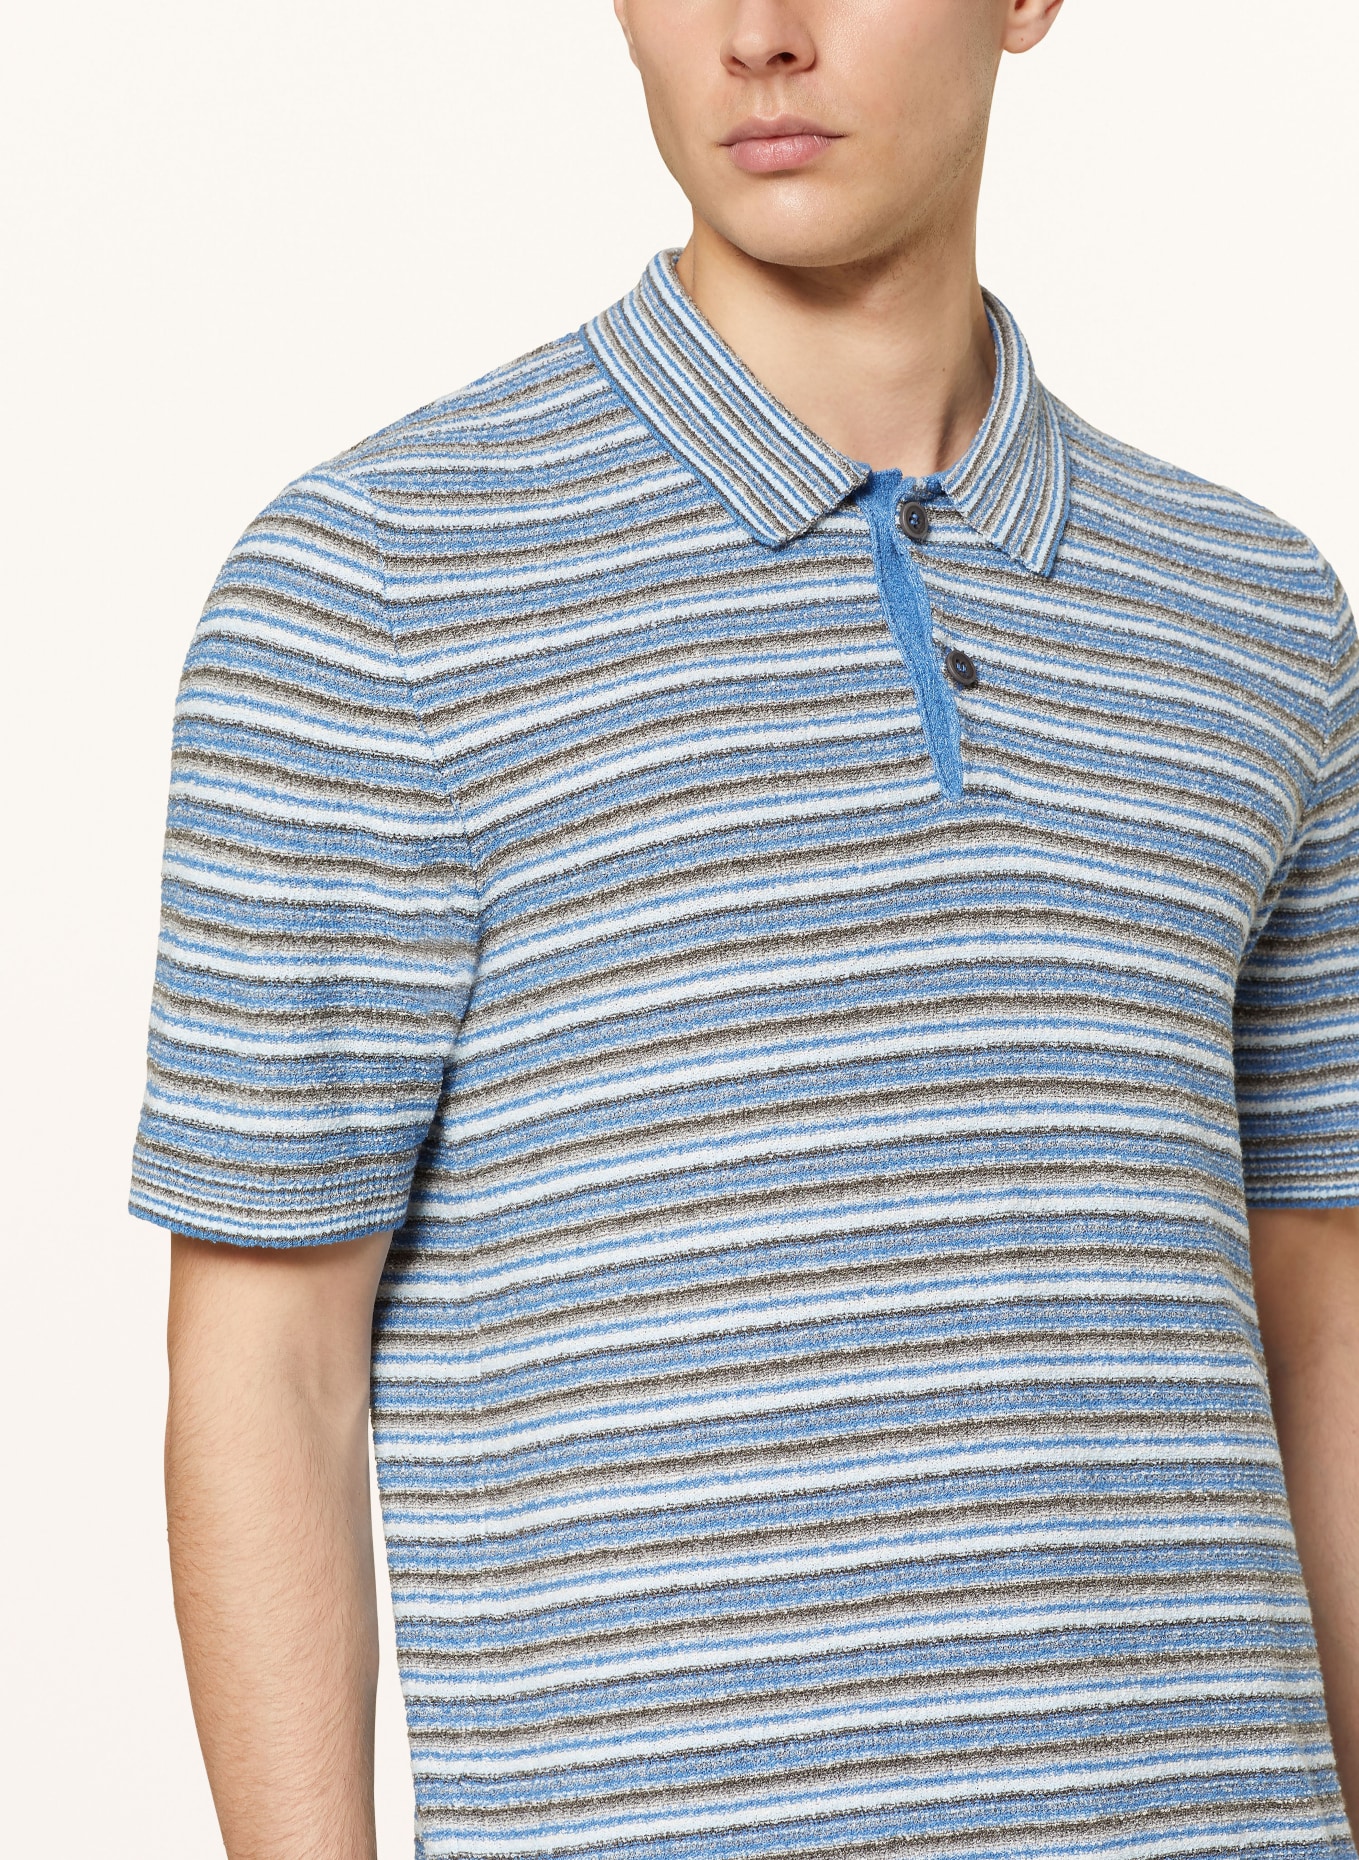 MAERZ MUENCHEN Knitted polo shirt, Color: LIGHT BLUE/ WHITE/ DARK GRAY (Image 4)